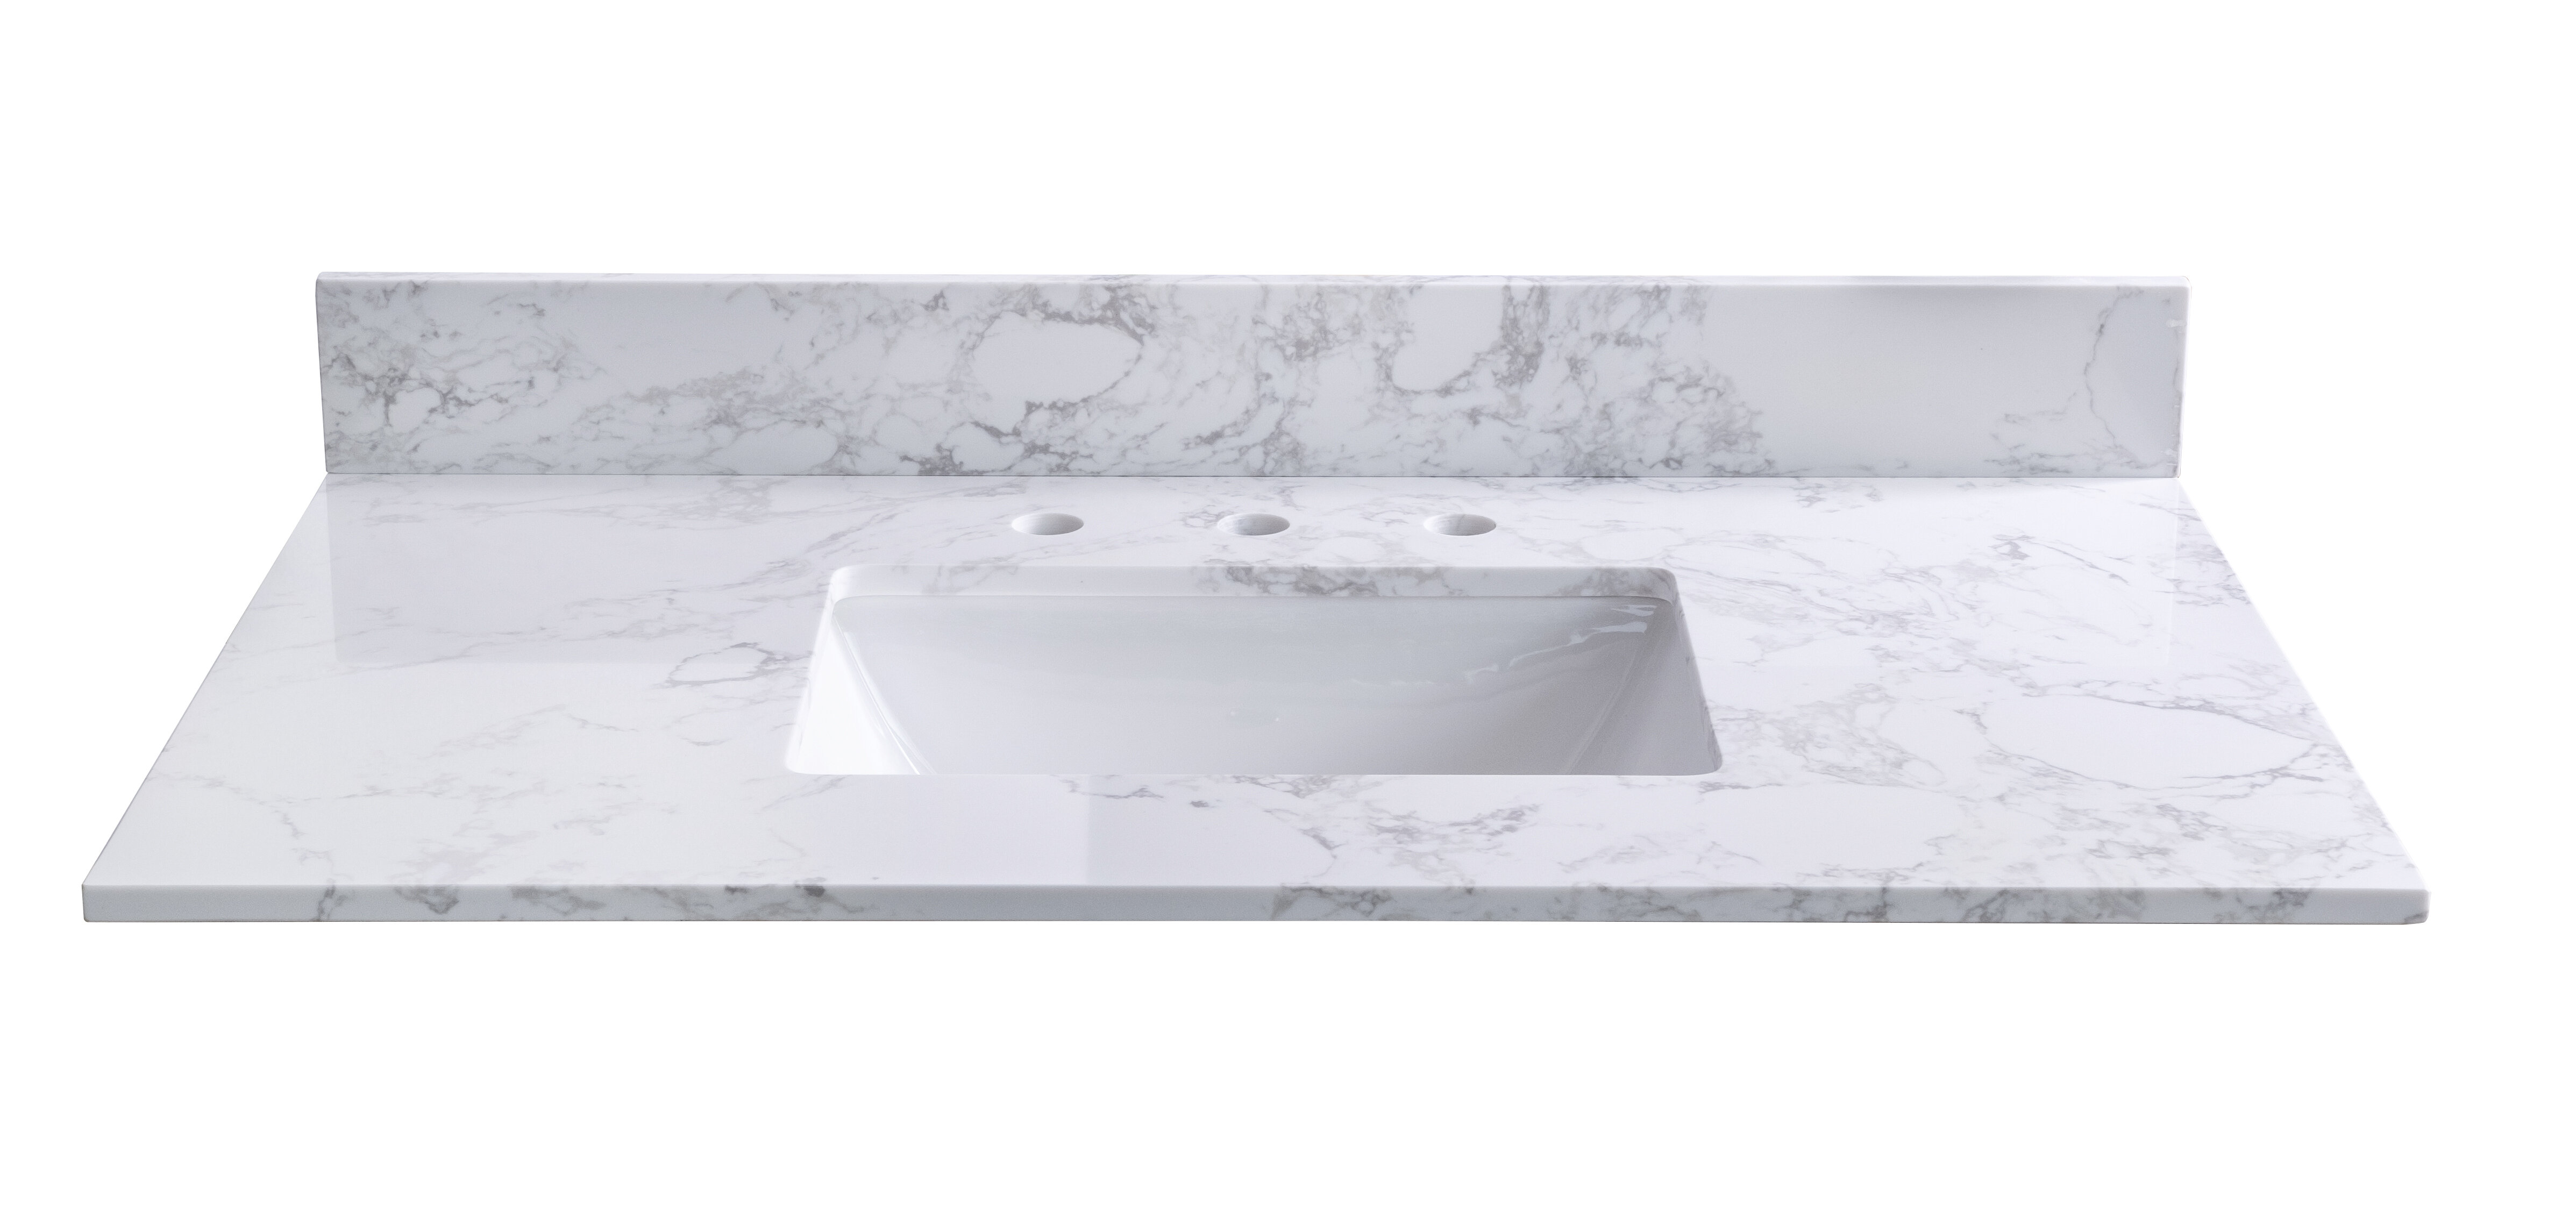 Hz Malus Flower Llc 37 Single Bathroom Vanity Top In White With Sink With Rectangle Undermount Ceramic Sink And Back Splash For Bathrom Cabinet Wayfair